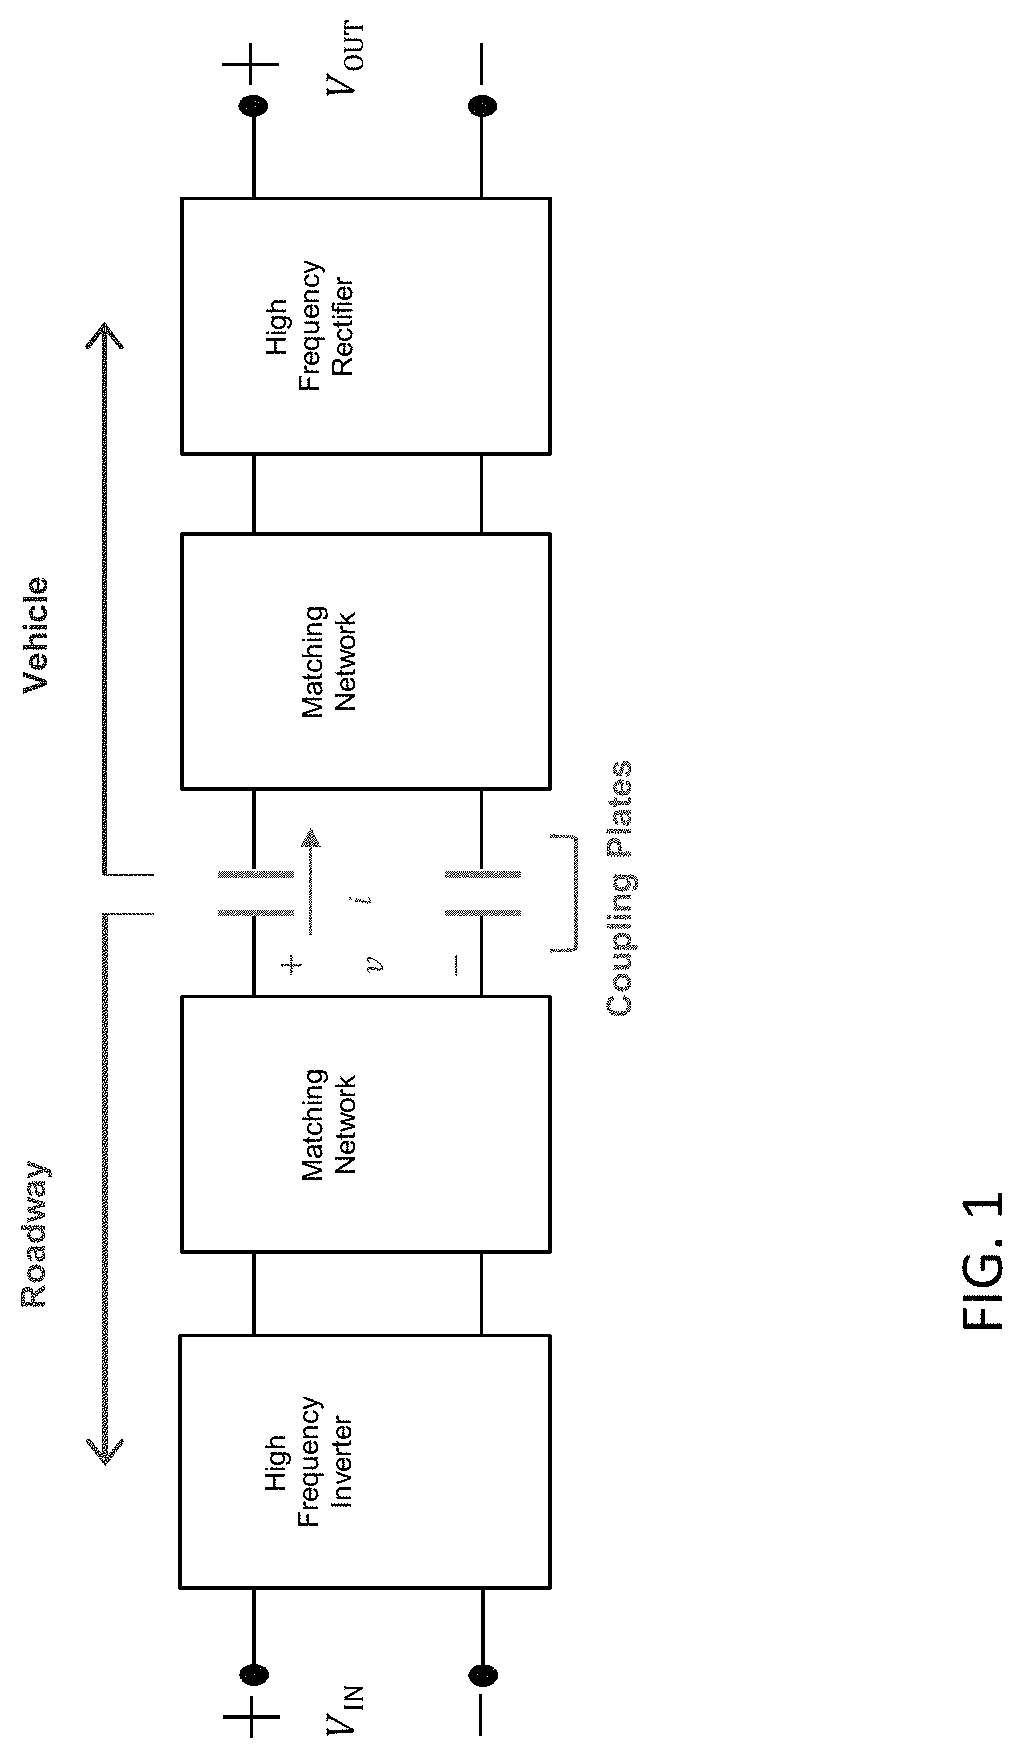 Matching networks, inductors, and coupled-inductor capacitive wireless power transfer circuit and related techniques